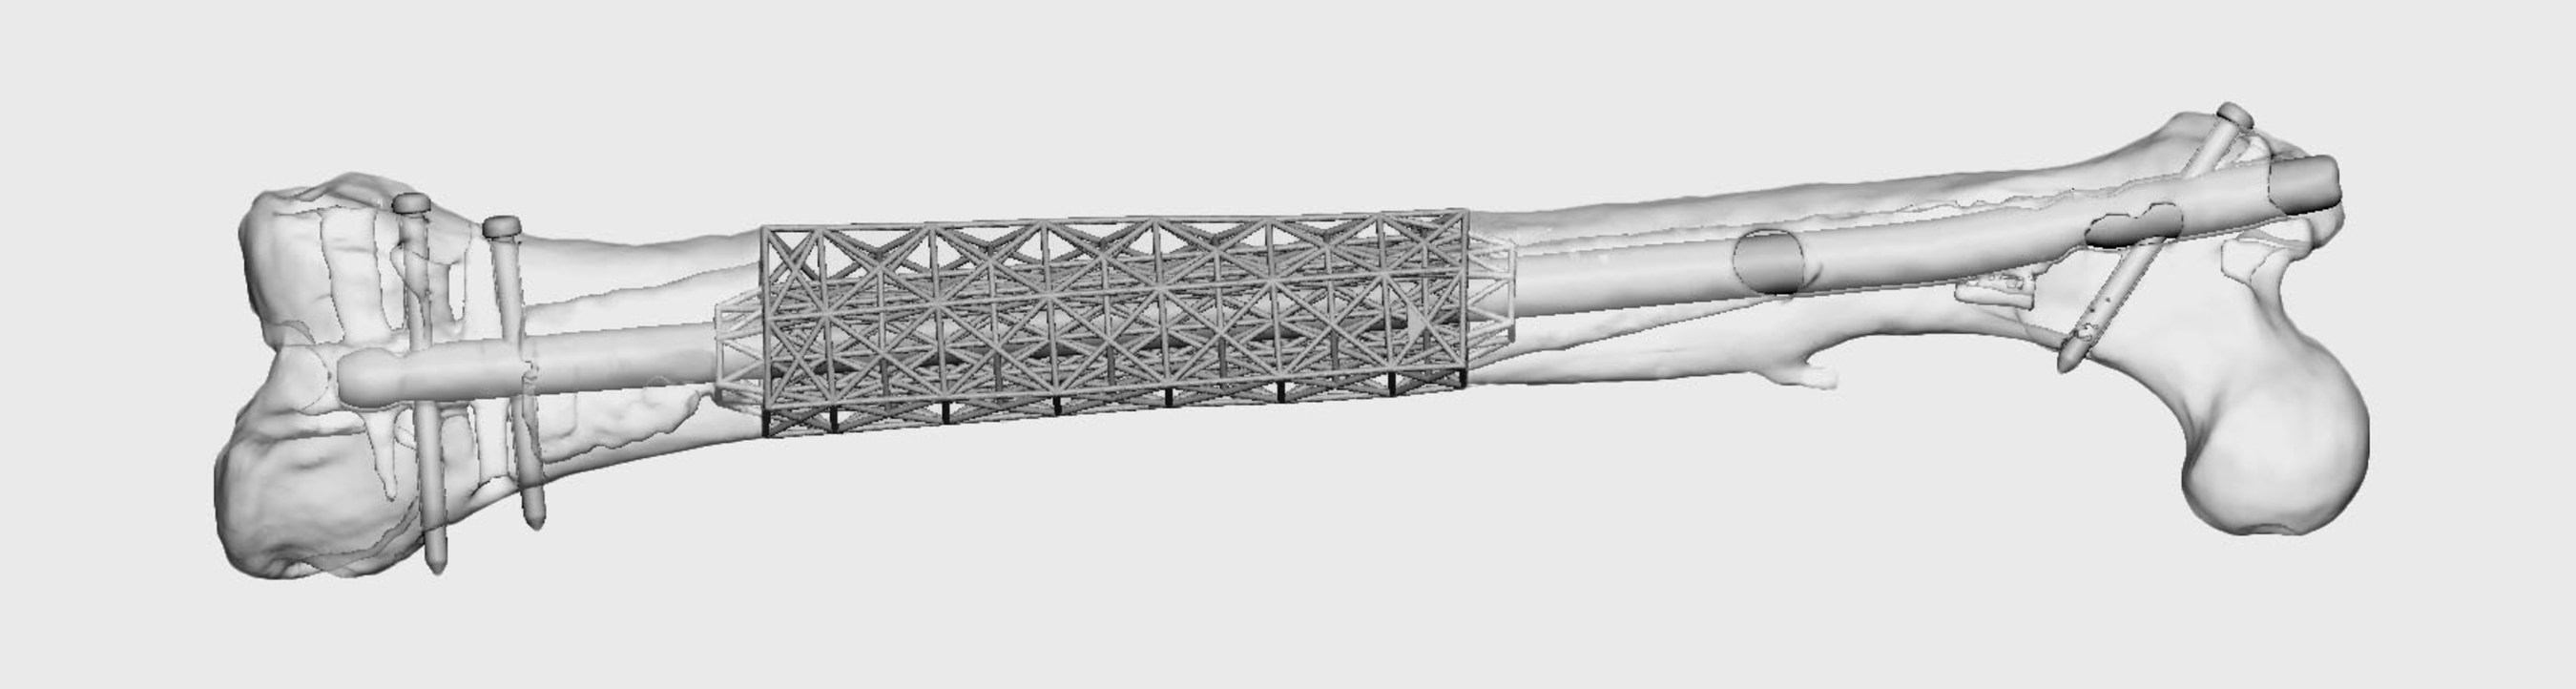 Structural engineering has been utilized for hundreds of years in bridges, roads and buildings. 4WEB utilizes structural engineering concepts such as truss design to produce innovative patient specific implants.